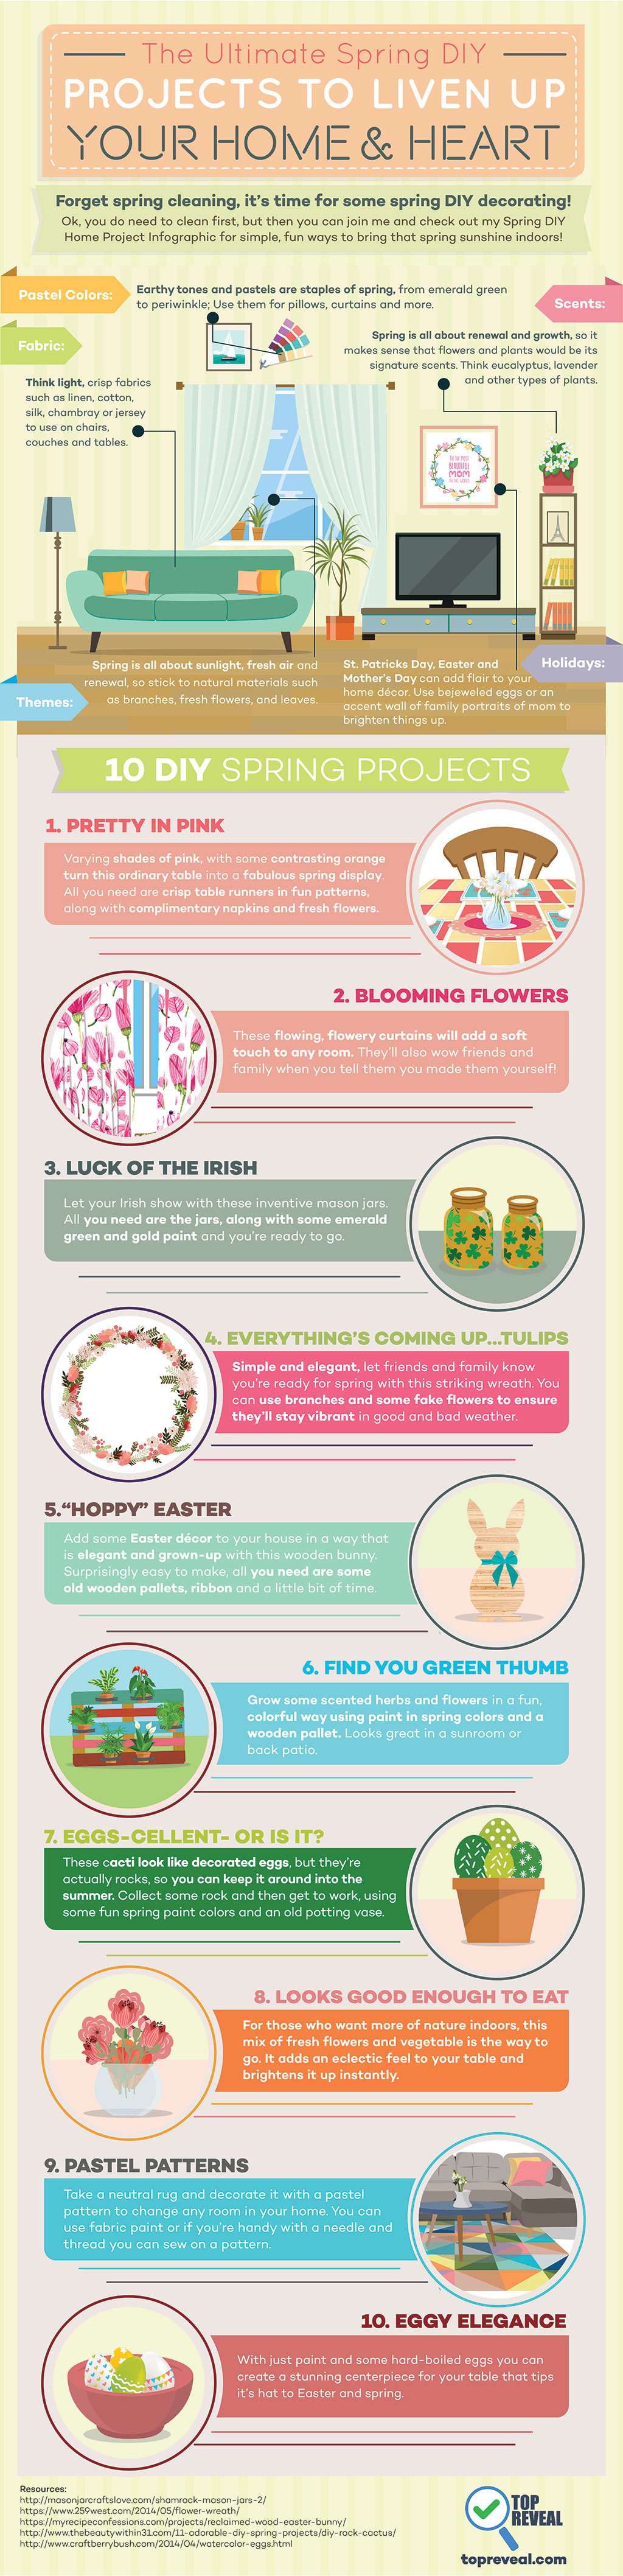 Infographic: Inspiring DIY Decor Ideas That Are Spring-Tastic from TopReveal.com